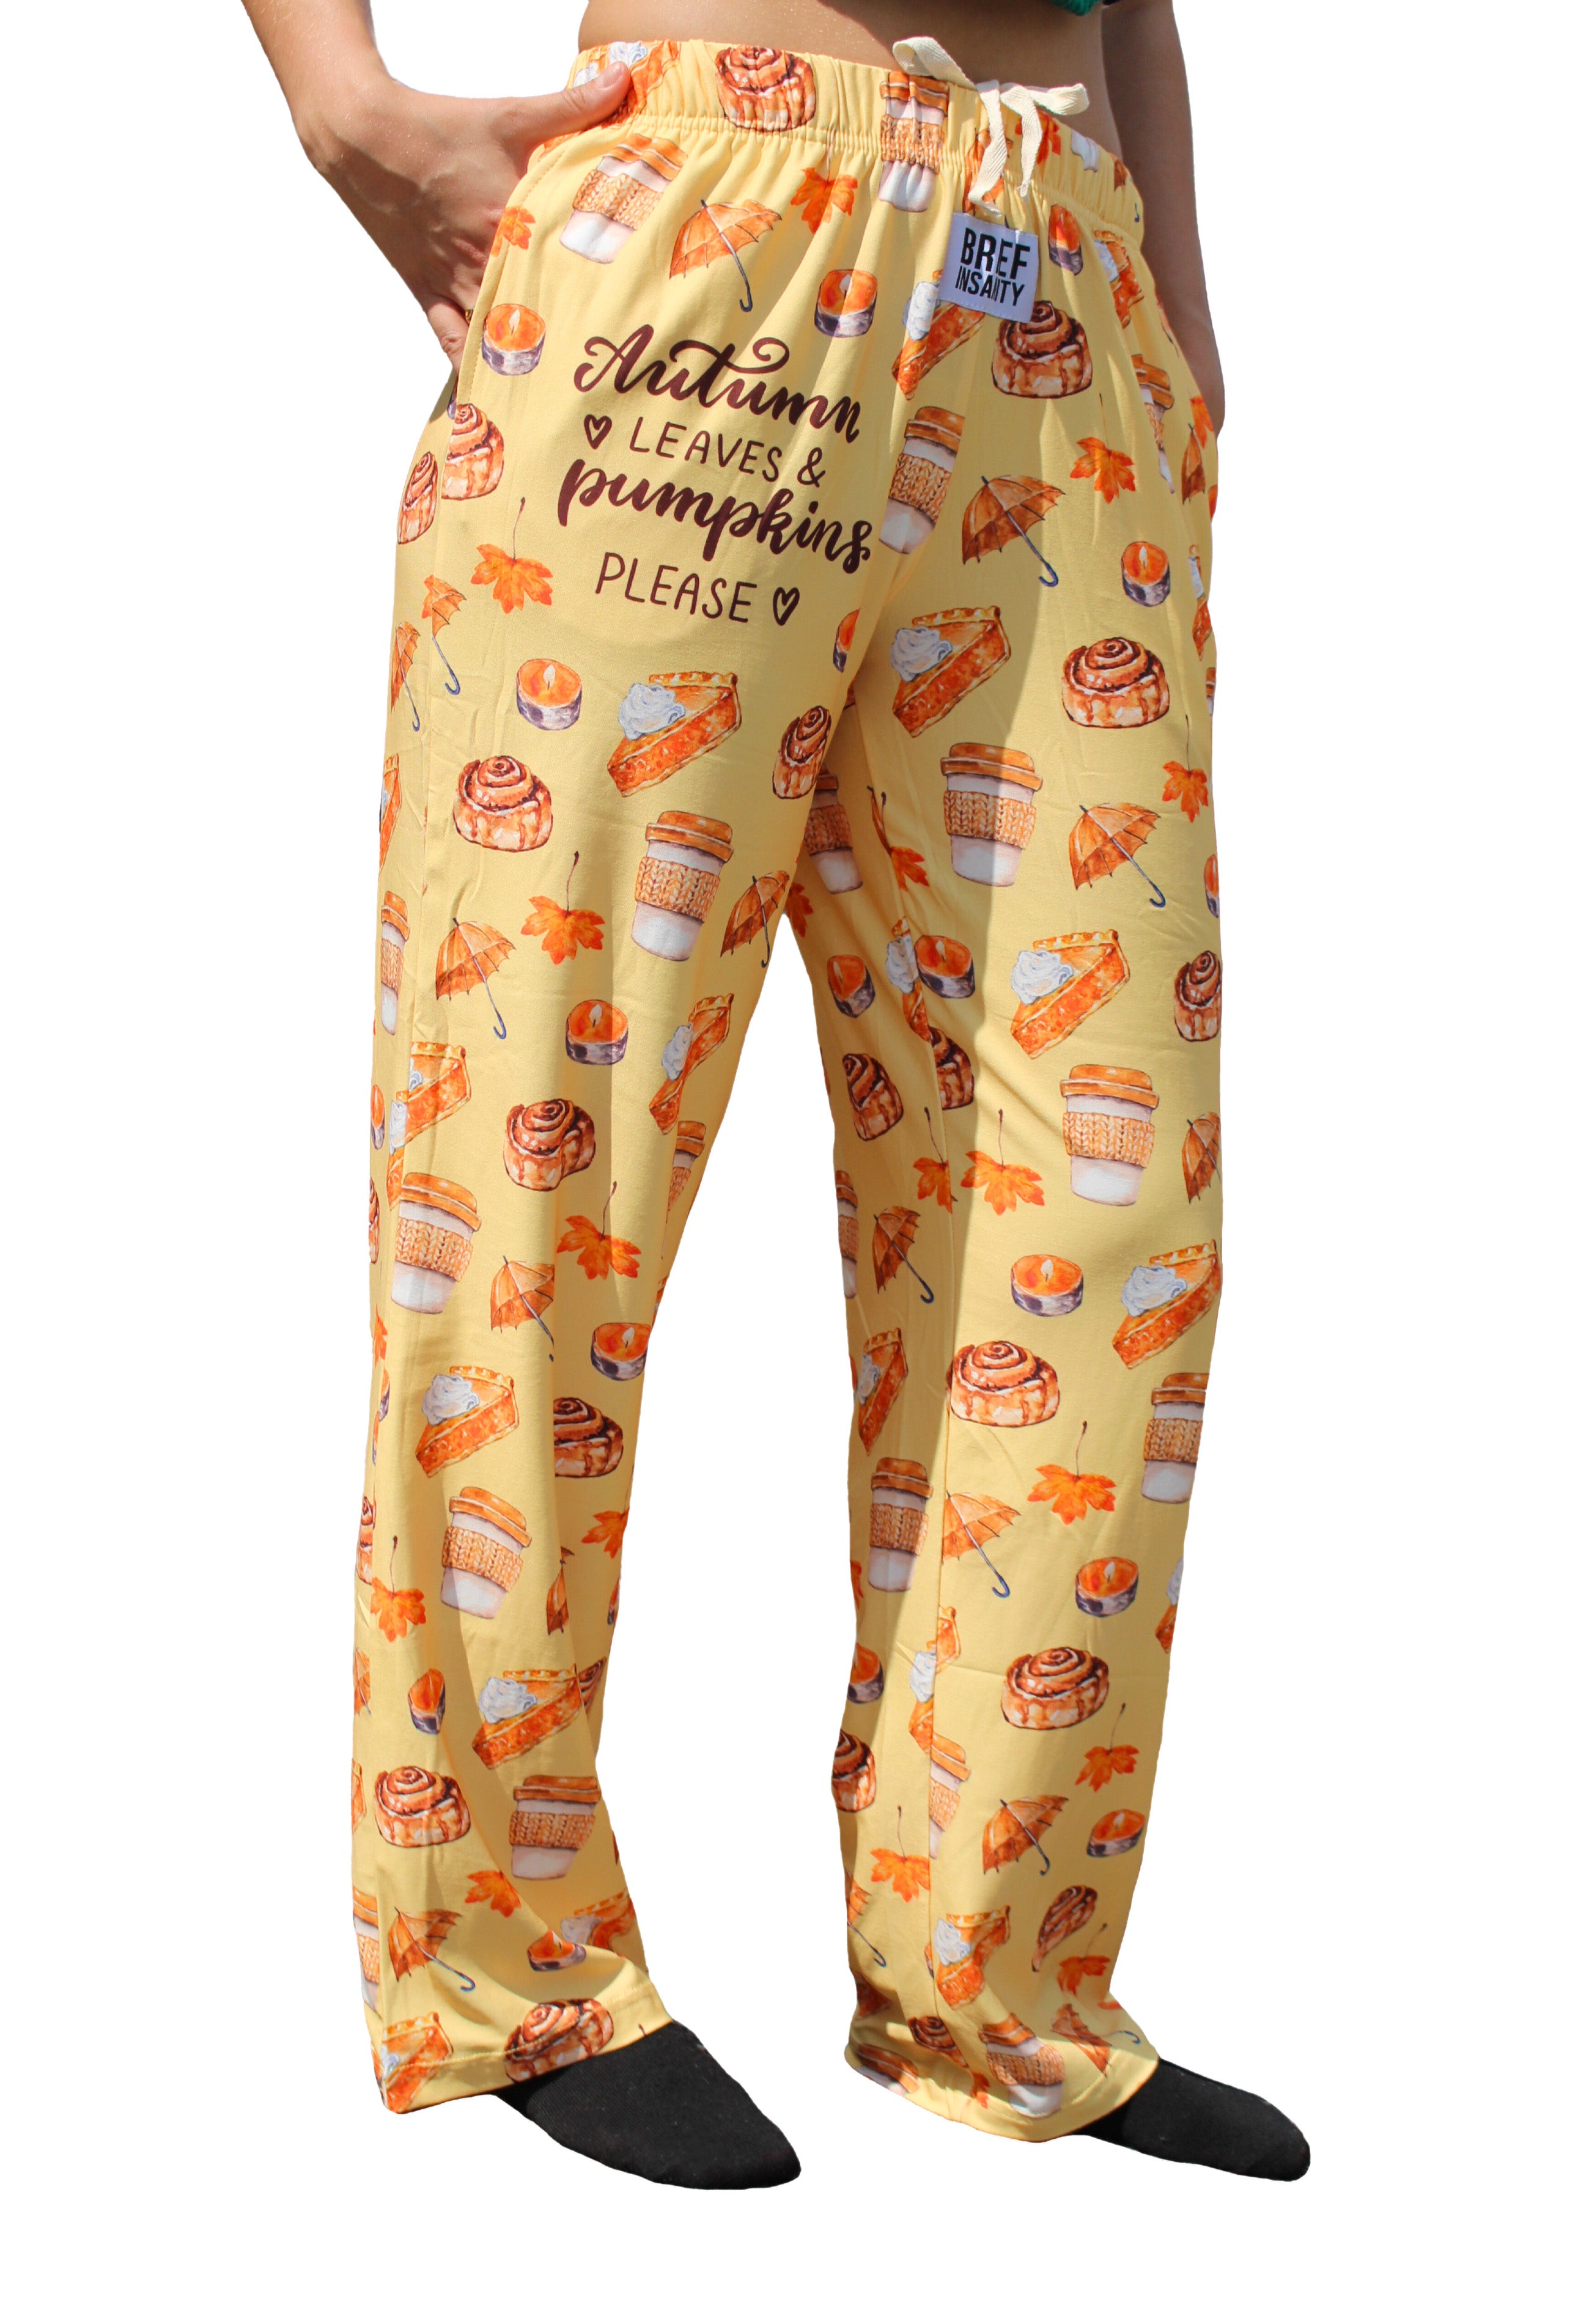 Autumn Leaves and Pumpkins Please Pajama Lounge Pants right side view on model (waist down)